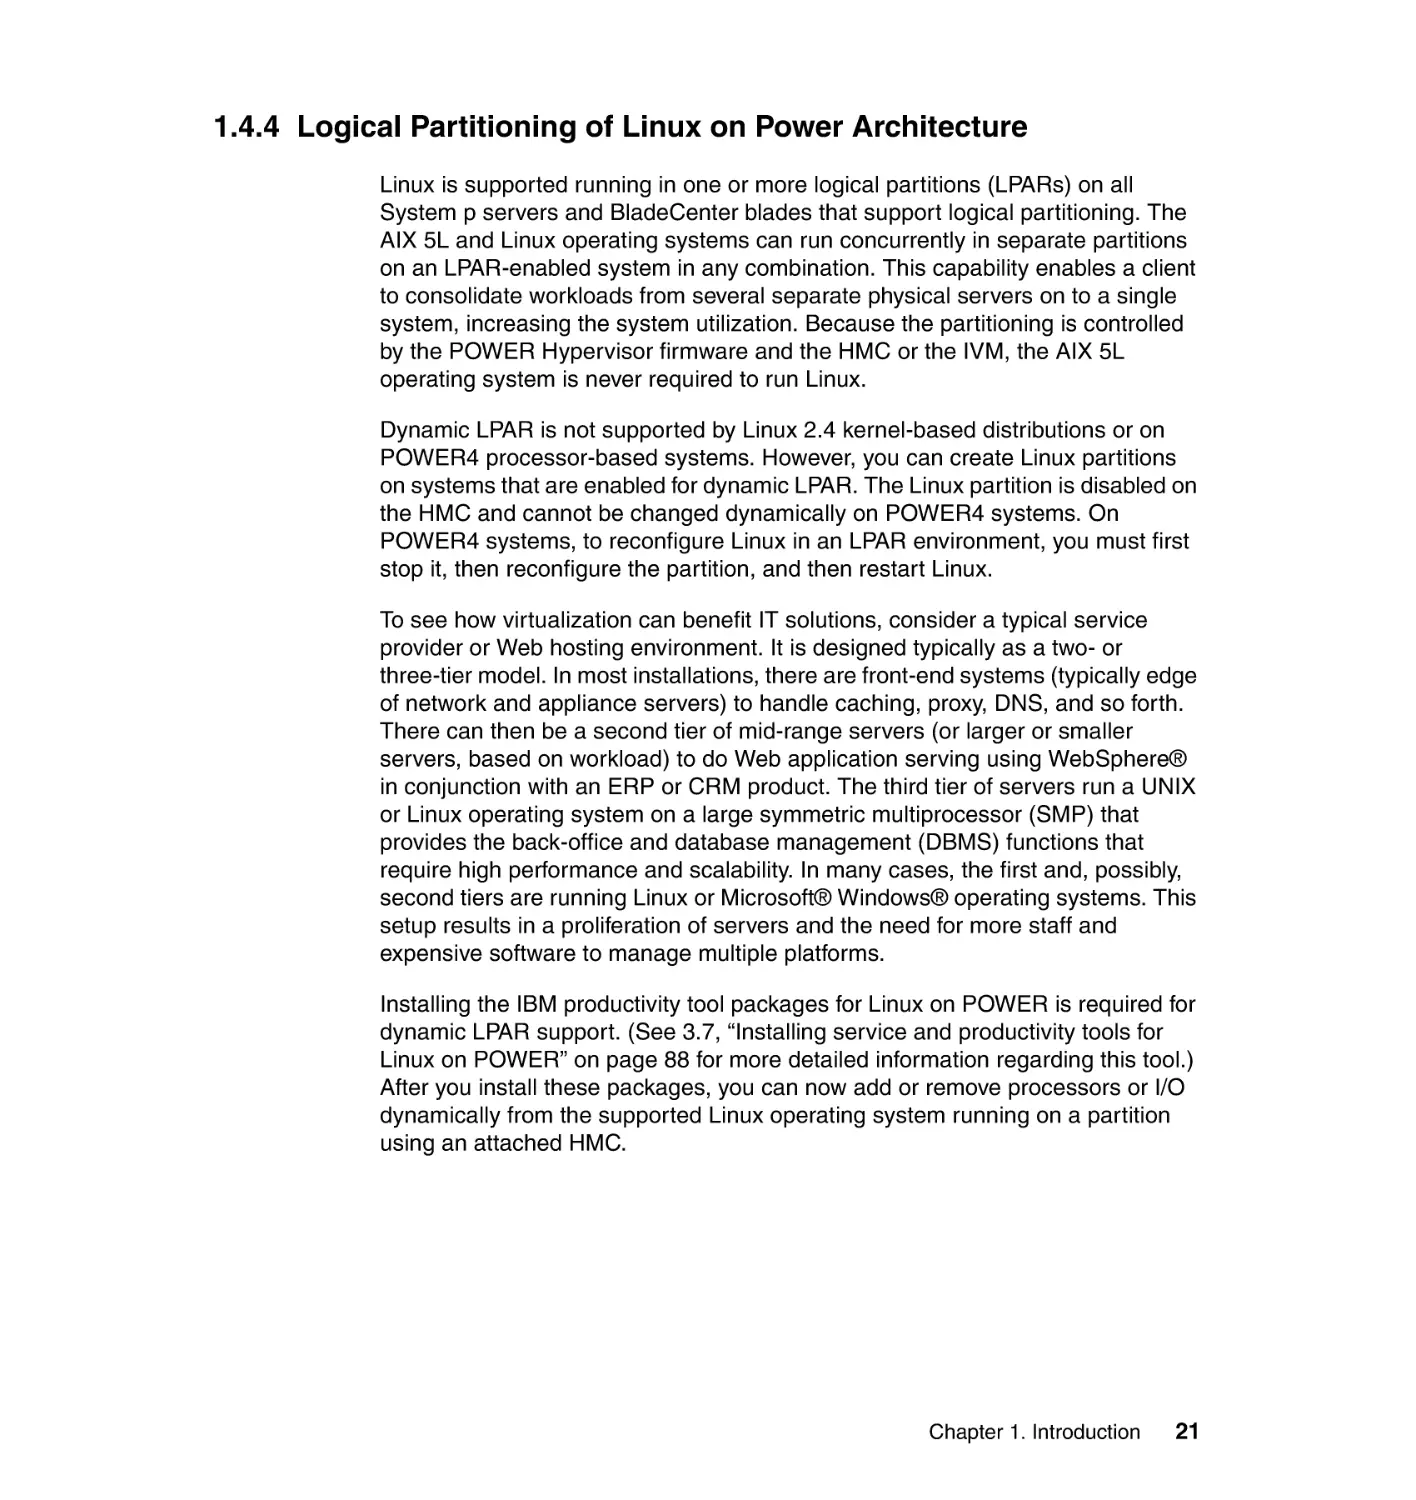 1.4.4 Logical Partitioning of Linux on Power Architecture